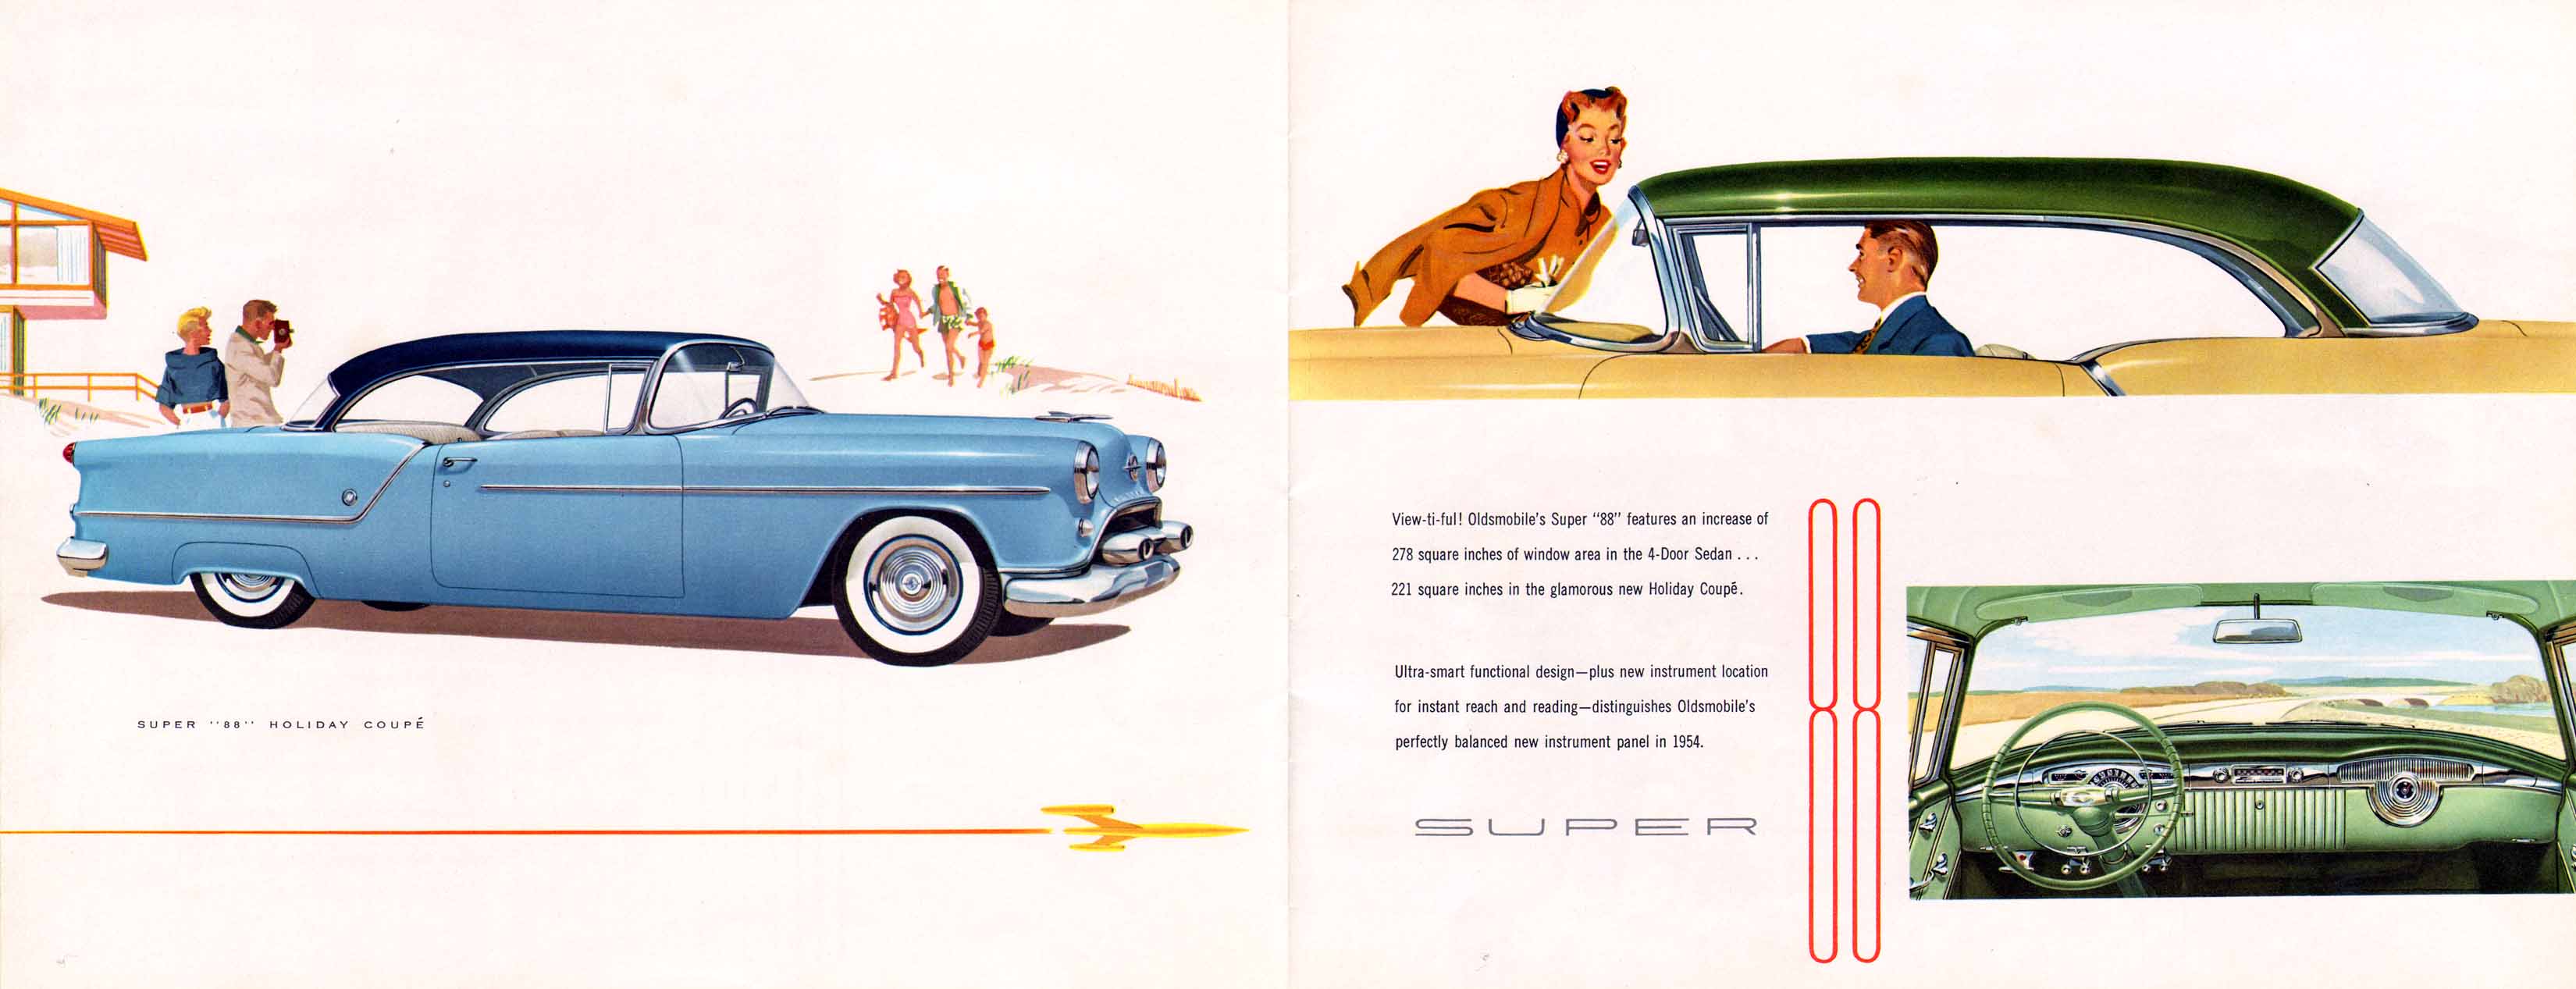 1954_Oldsmobile-a07-a08